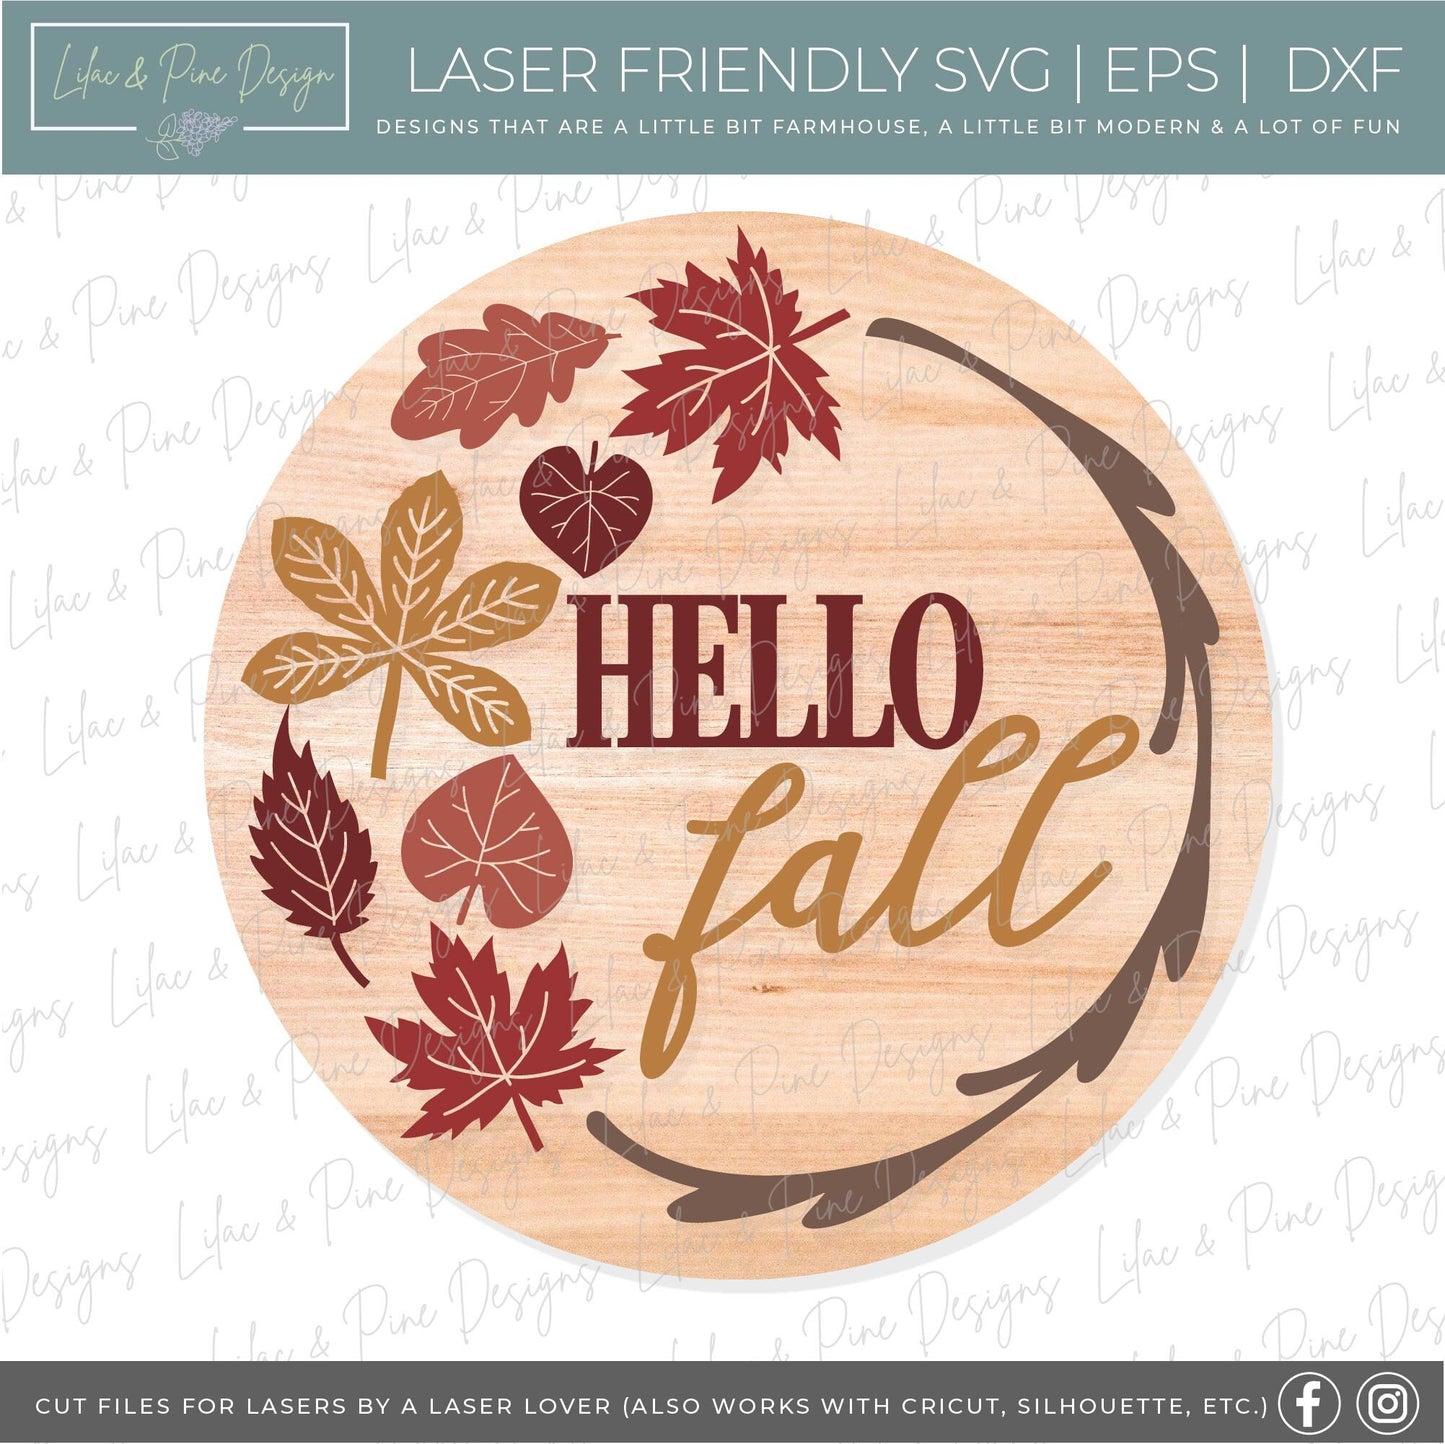 Hello Fall door hanger SVG, Fall welcome sign SVG, fall leaves round door hanger, Fall porch decor, Fall round sign svg, Glowforge laser SVG